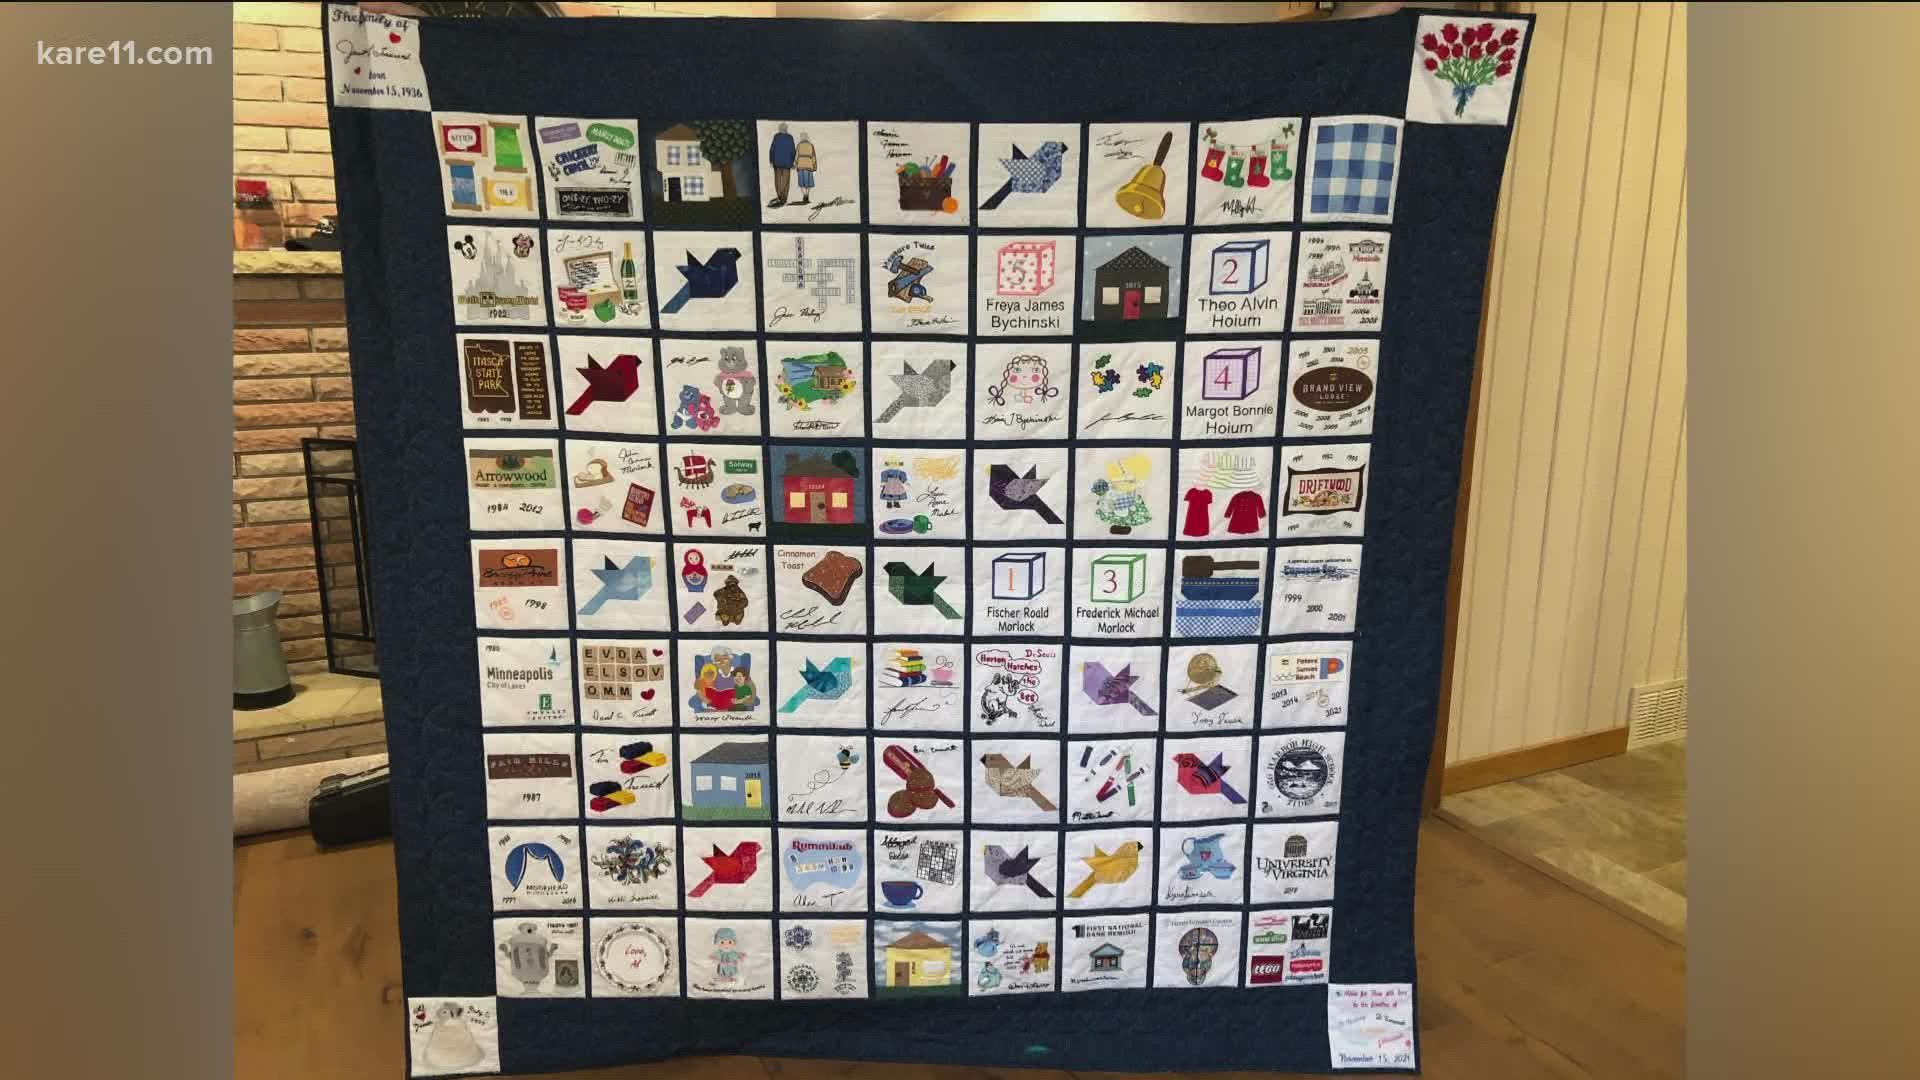 Diane Nieling says she and her siblings spent months and thousands of hours creating the quilt before it was stolen Friday.